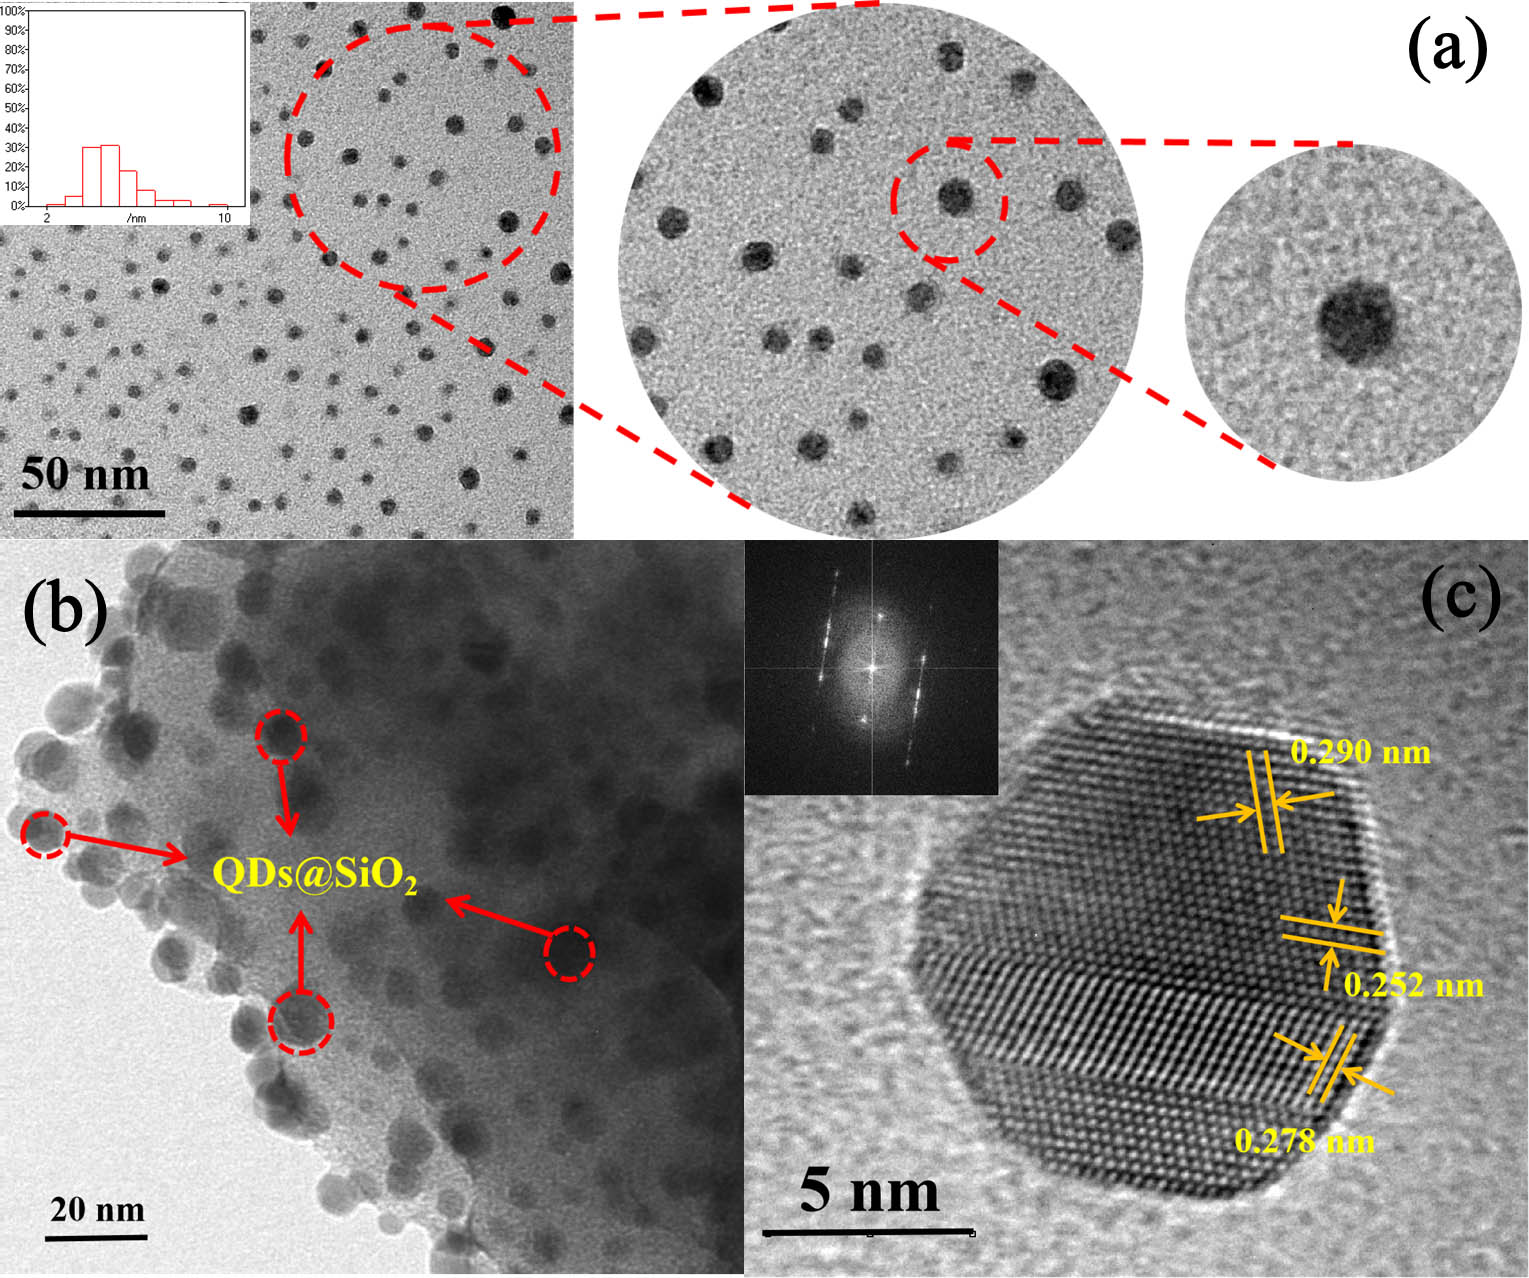 TEM images of QDs@SiO2 at different resolutions. Inset of (a) is the size distributions of the QDs@SiO2 nanospheres. Inset of (c) is the corresponding SAED image.